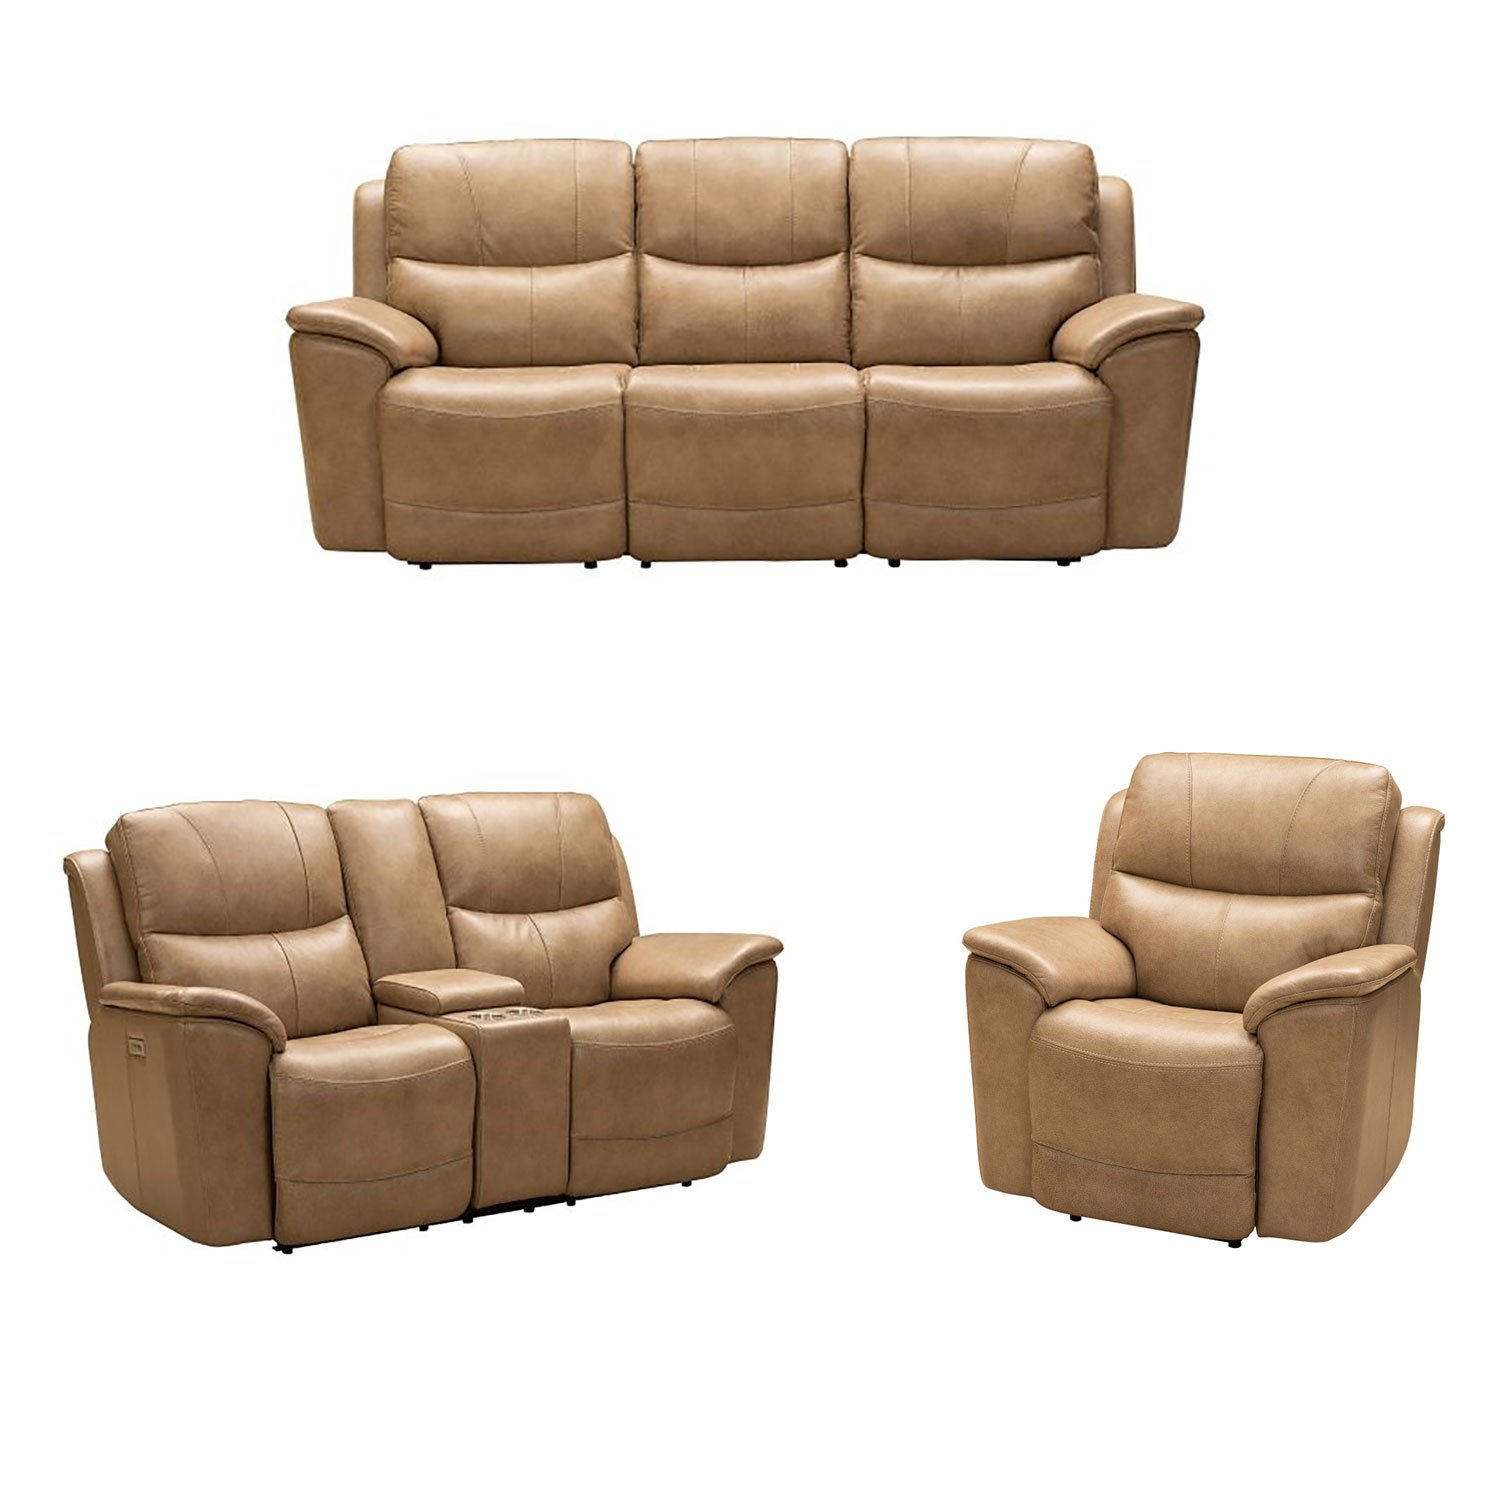 Barcalounger Kaden Power Reclining Sofa Set with Power Head Rests and Lumbar - Elliott Taupe/Leather Match